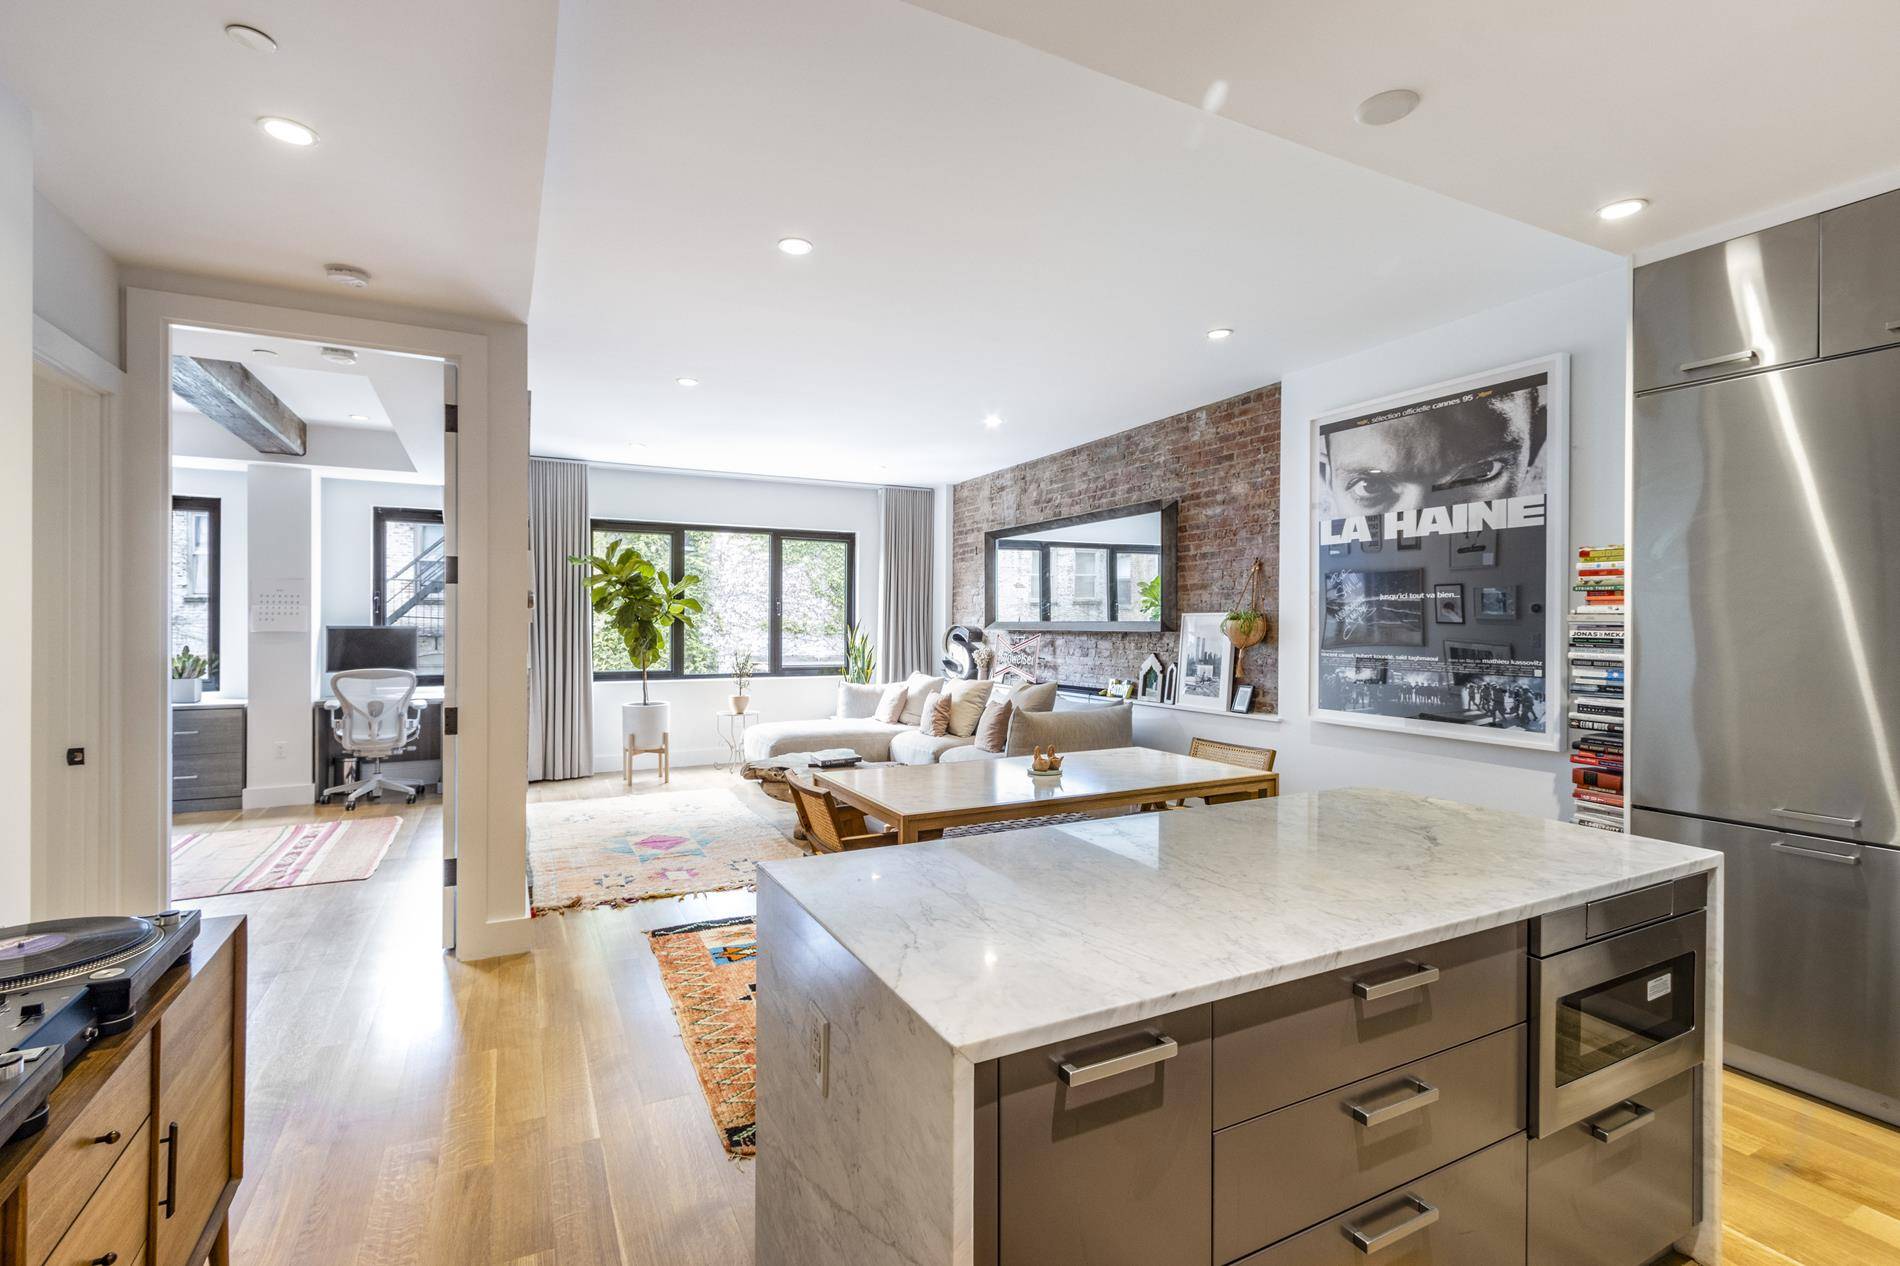 Parking spot included Inspired renovation by The Meshburg Group to emphasize the building's century old historic bones, this 1, 227 square foot showplace is perfect for anyone who appreciates architectural ...